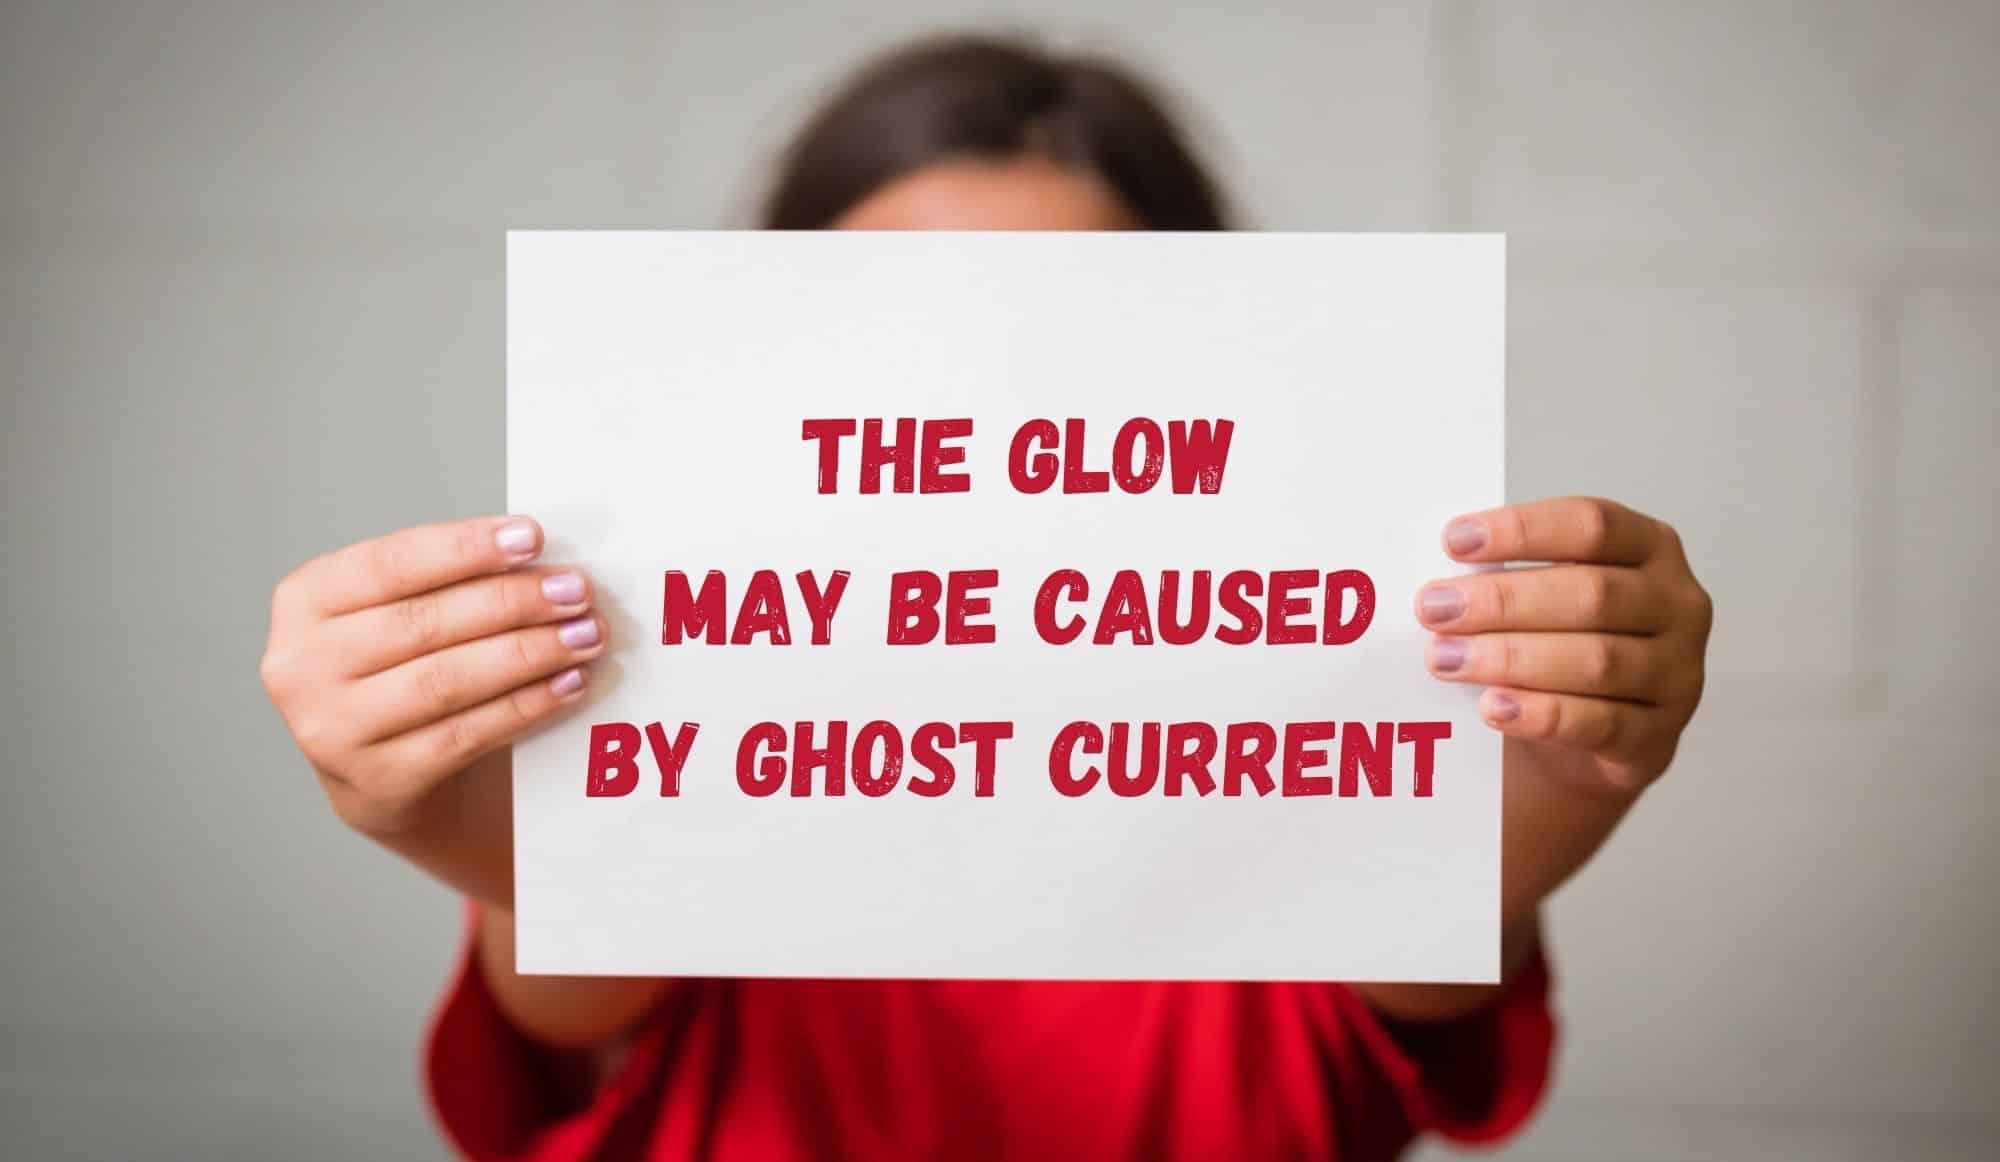 The glow may be caused by ghost current